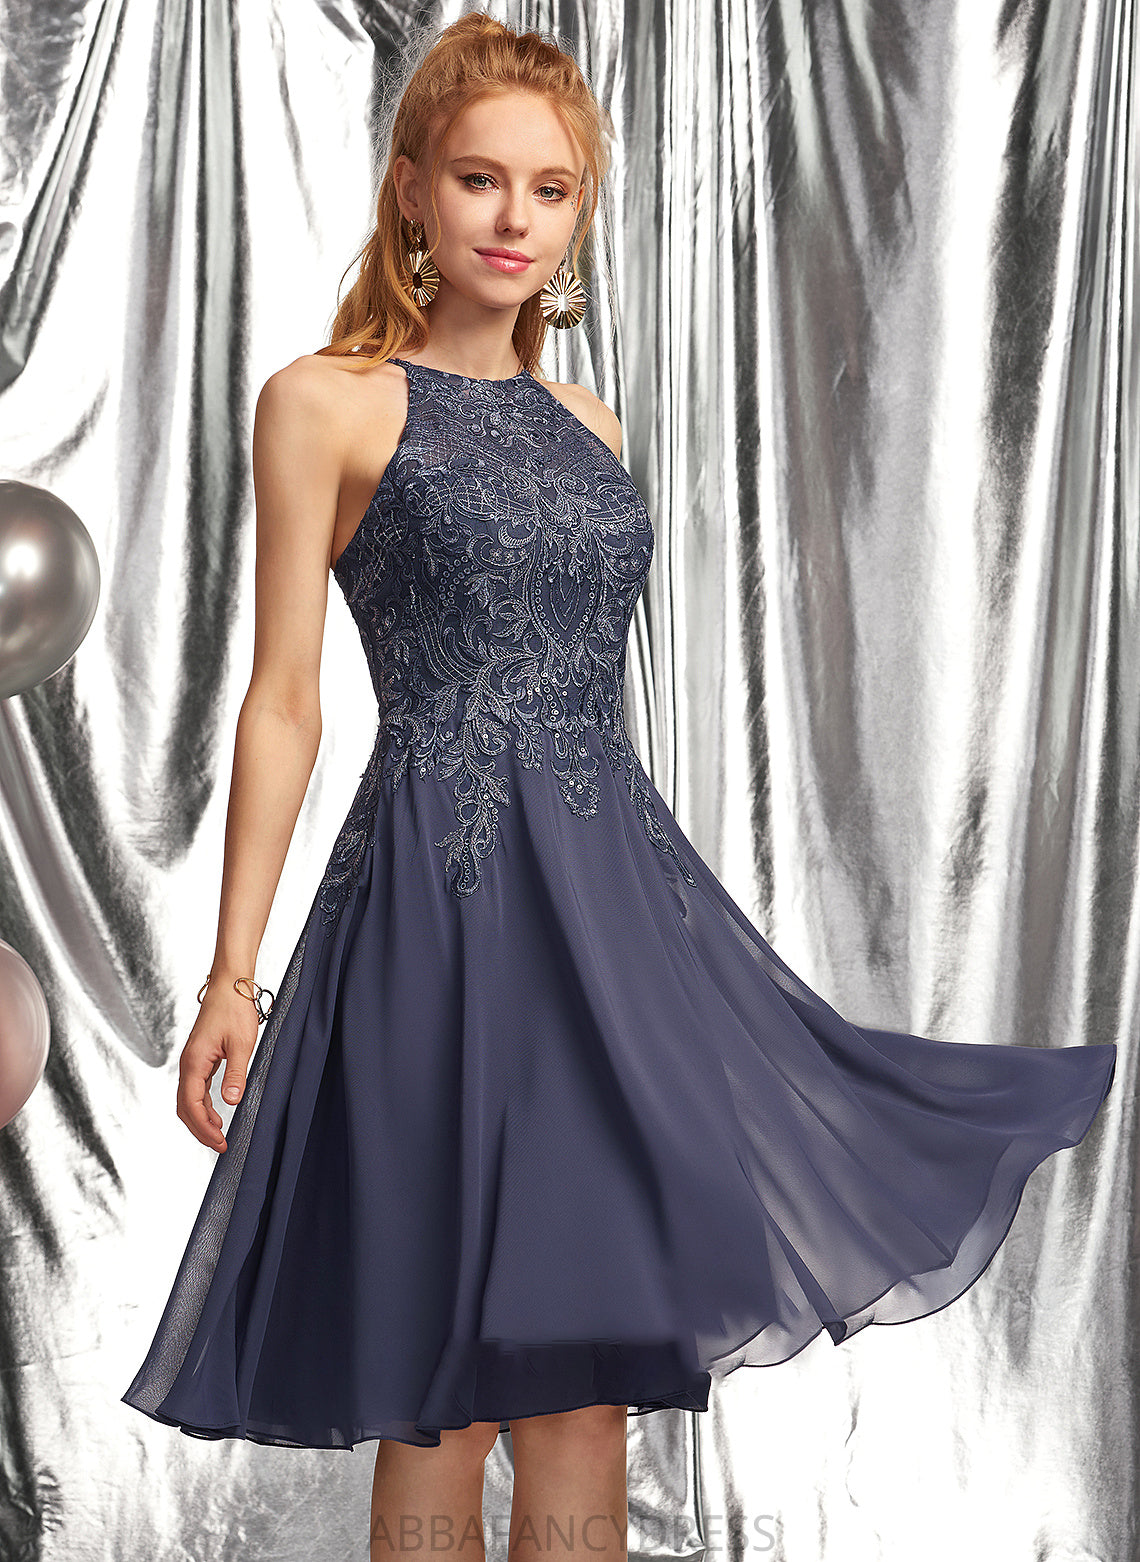 Arabella Chiffon With Appliques Lace Scoop A-Line Knee-Length Neck Prom Dresses